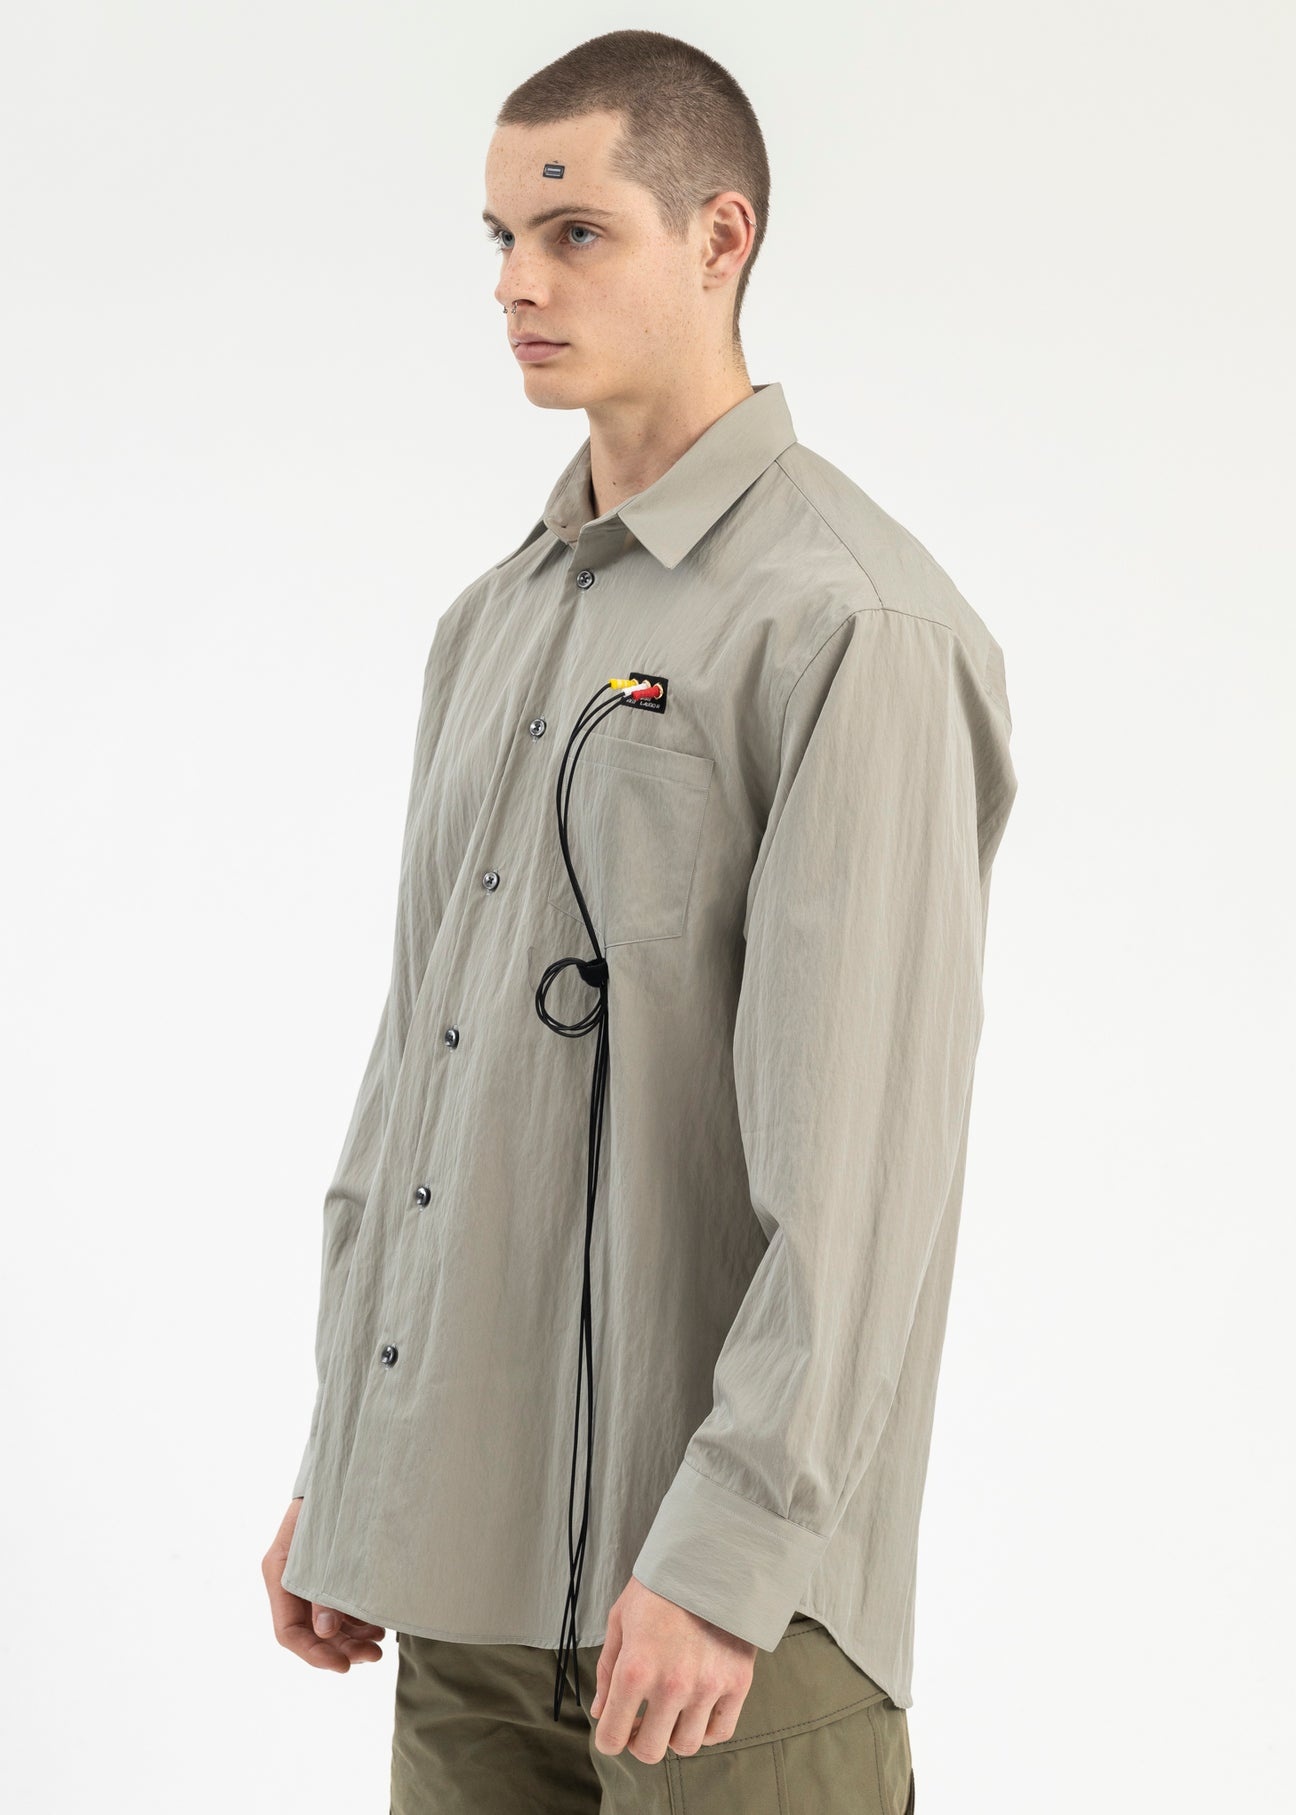 GREY RCA CABLE EMBROIDERY SHIRT - 3